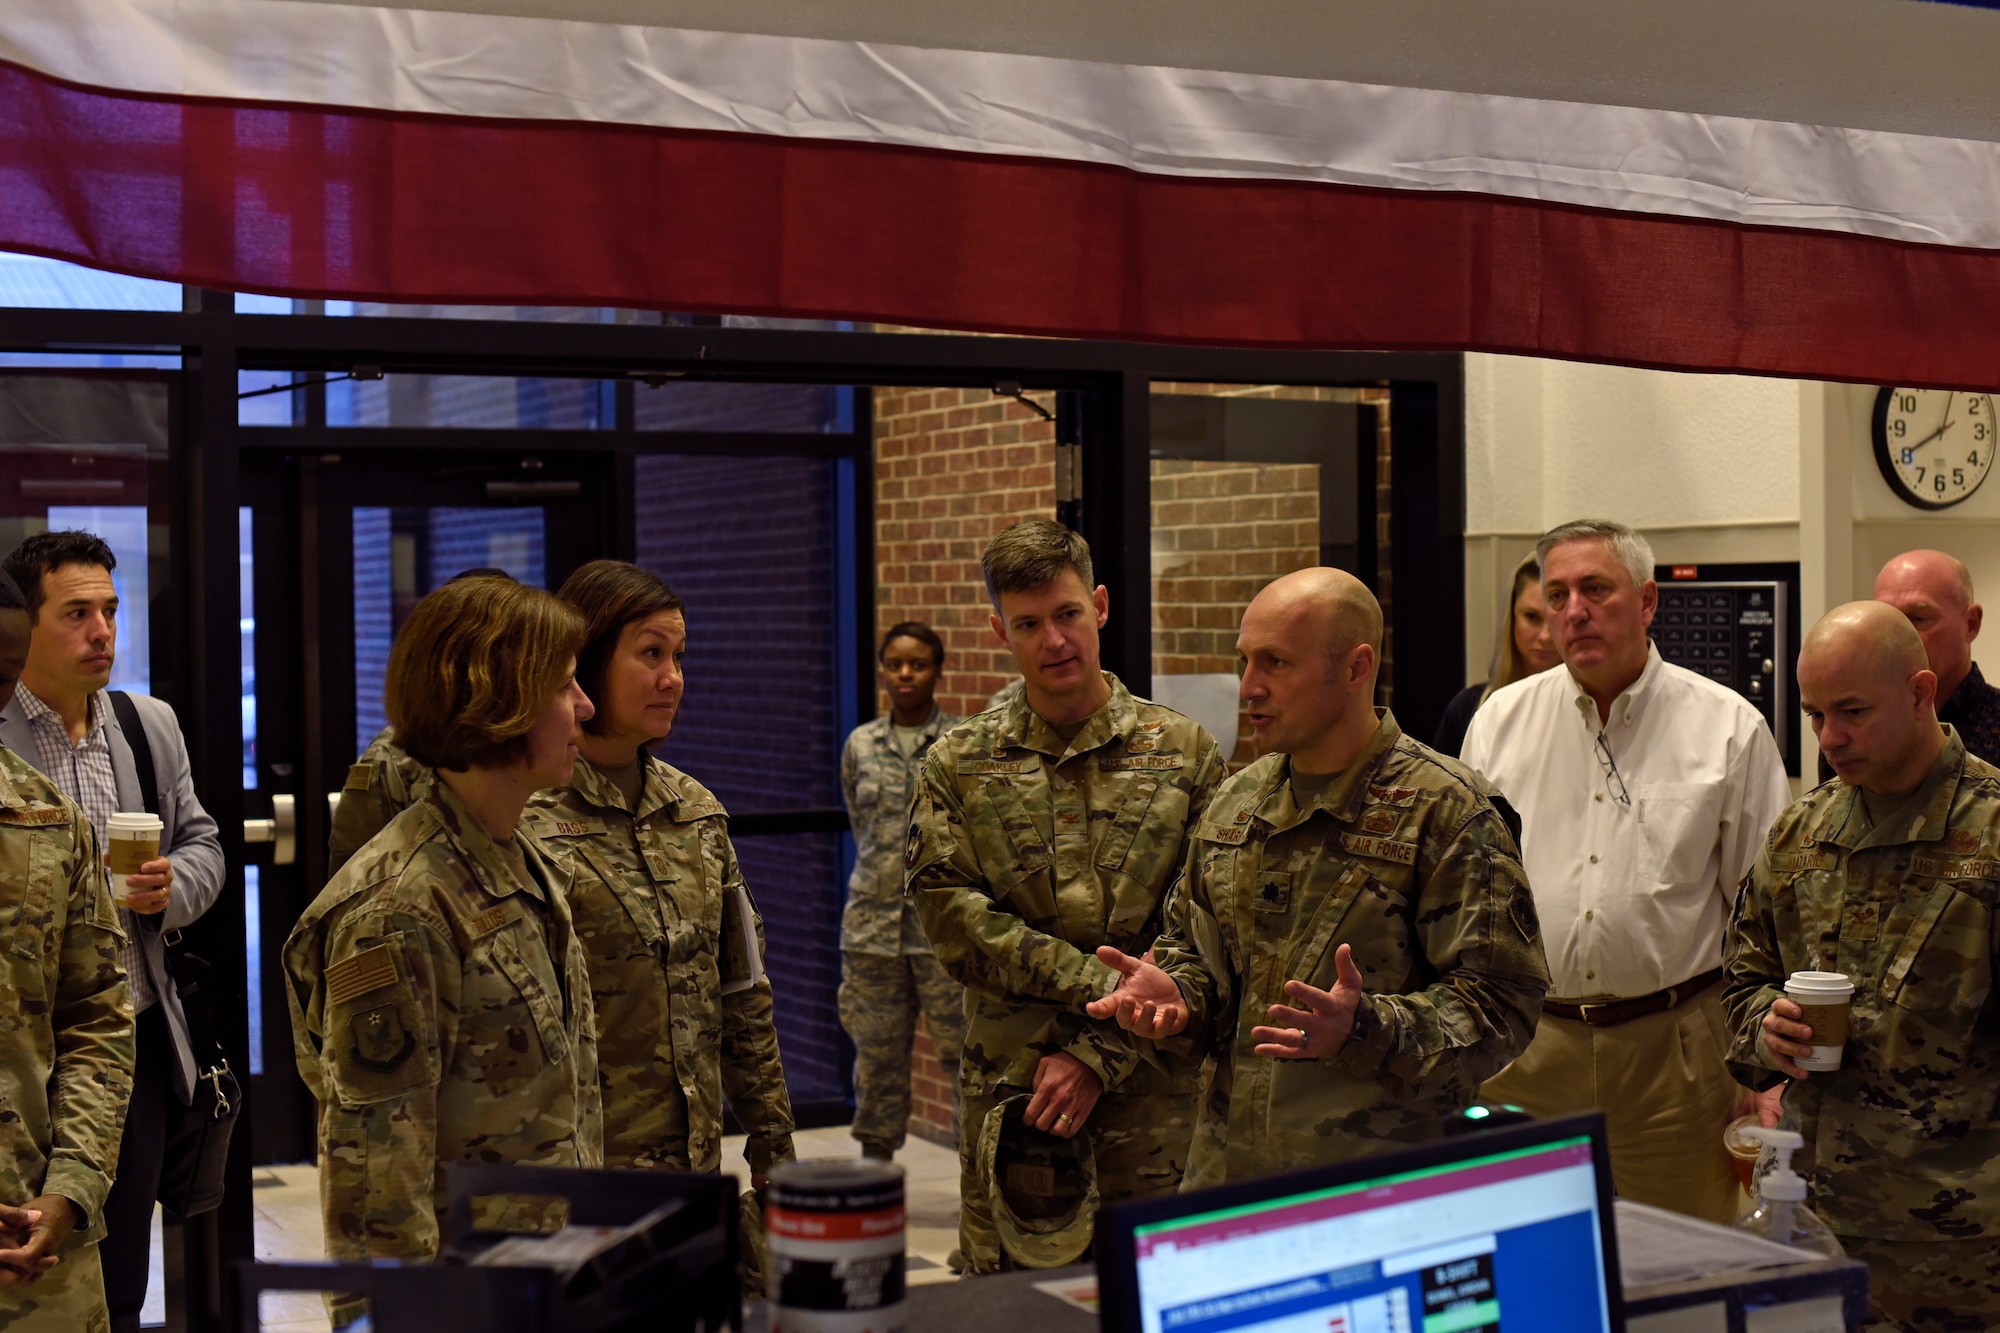 U.S. Air Force Lt. Col. Christopher Sharp, 316th Training Squadron commander, briefs Maj. Gen. Andrea Tullos, 2nd Air Force commander, about the student housing status during her tour of Goodfellow Air Force Base, Texas, Nov. 21, 2019. During her tour of the dormitory, Tullos was shown renovations being made to increase the Airmen’s quality of life. (U.S. Air Force photo by Airman 1st Class Zachary Chapman/Released)